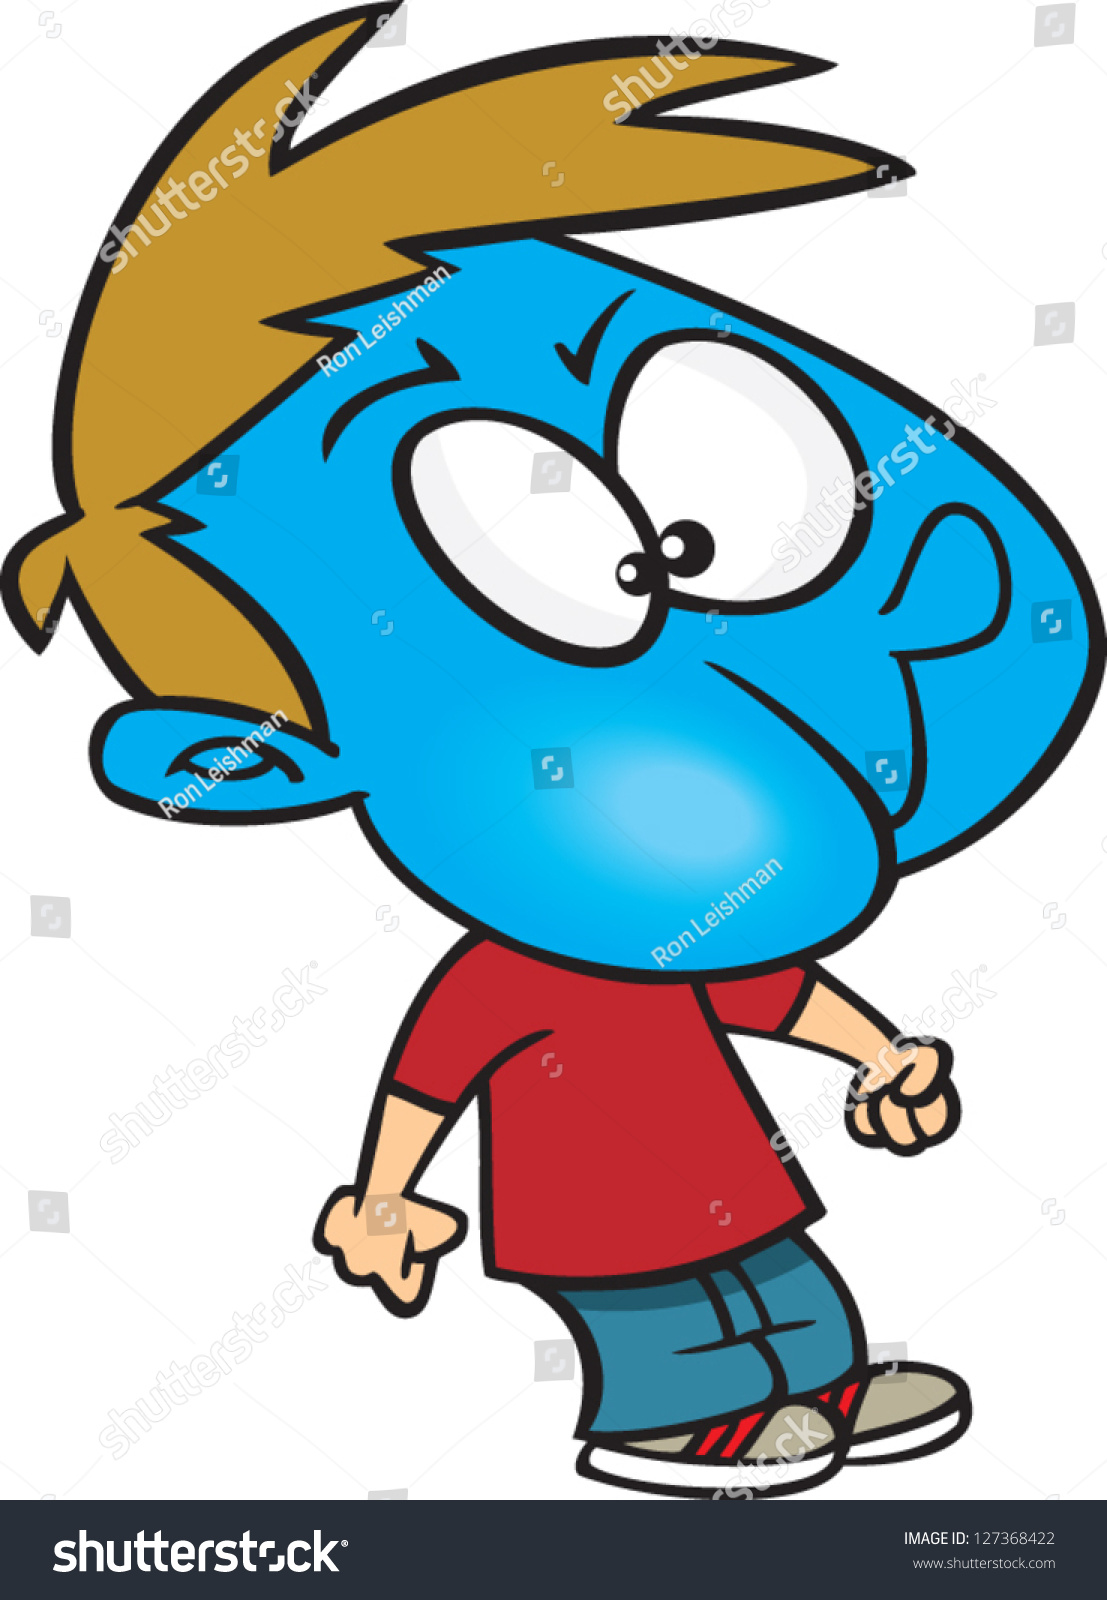 Image result for cartoon kid holding his breath